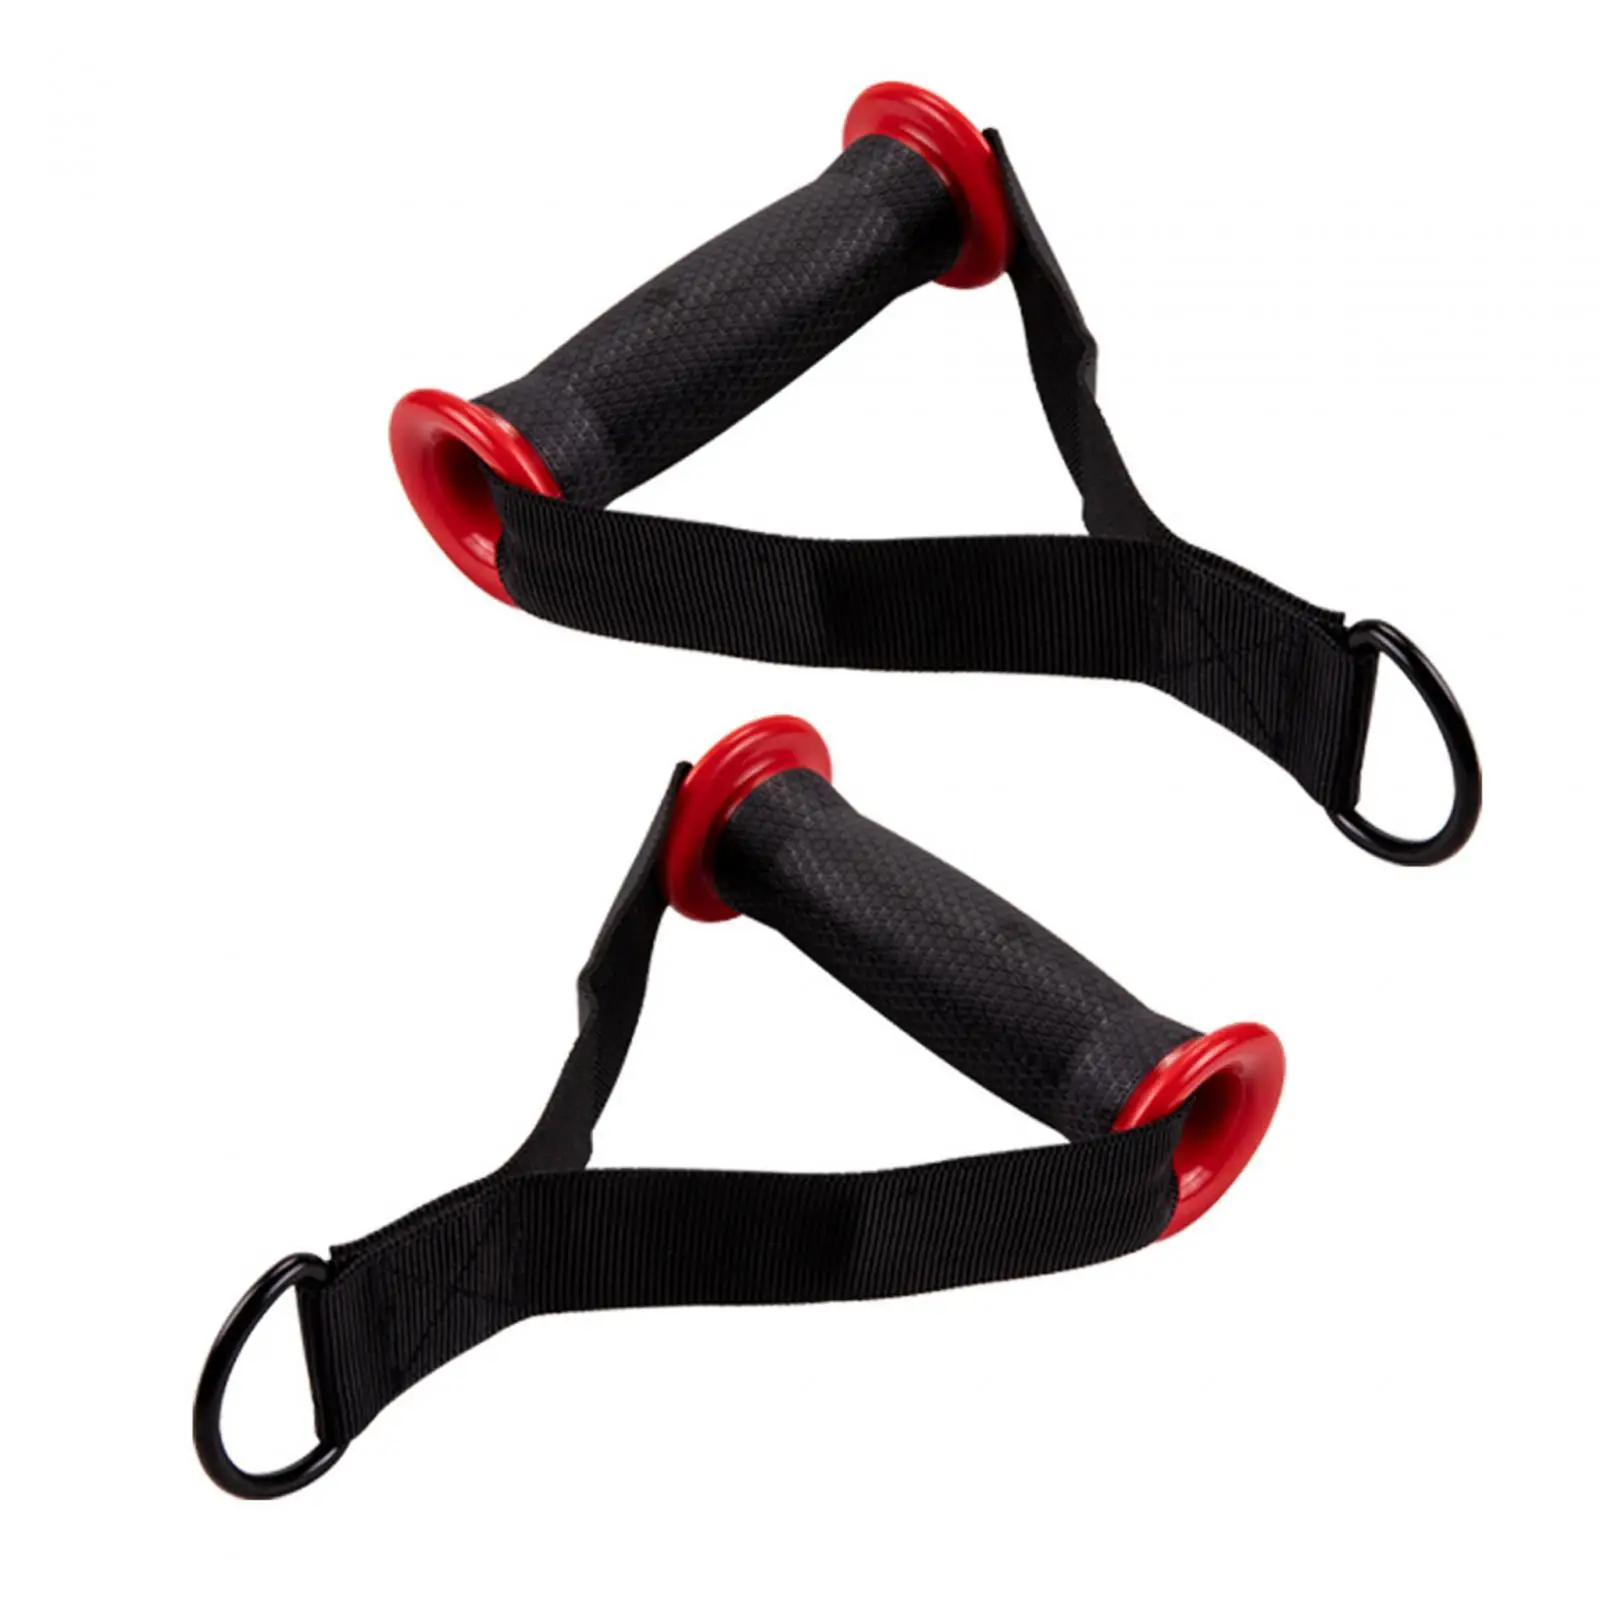 2Pcs Gym Handle Body Fitness Resistance Exercise Attachment Stirrup Ab Workout Push Pull Pull Band Handles Fitness Straps